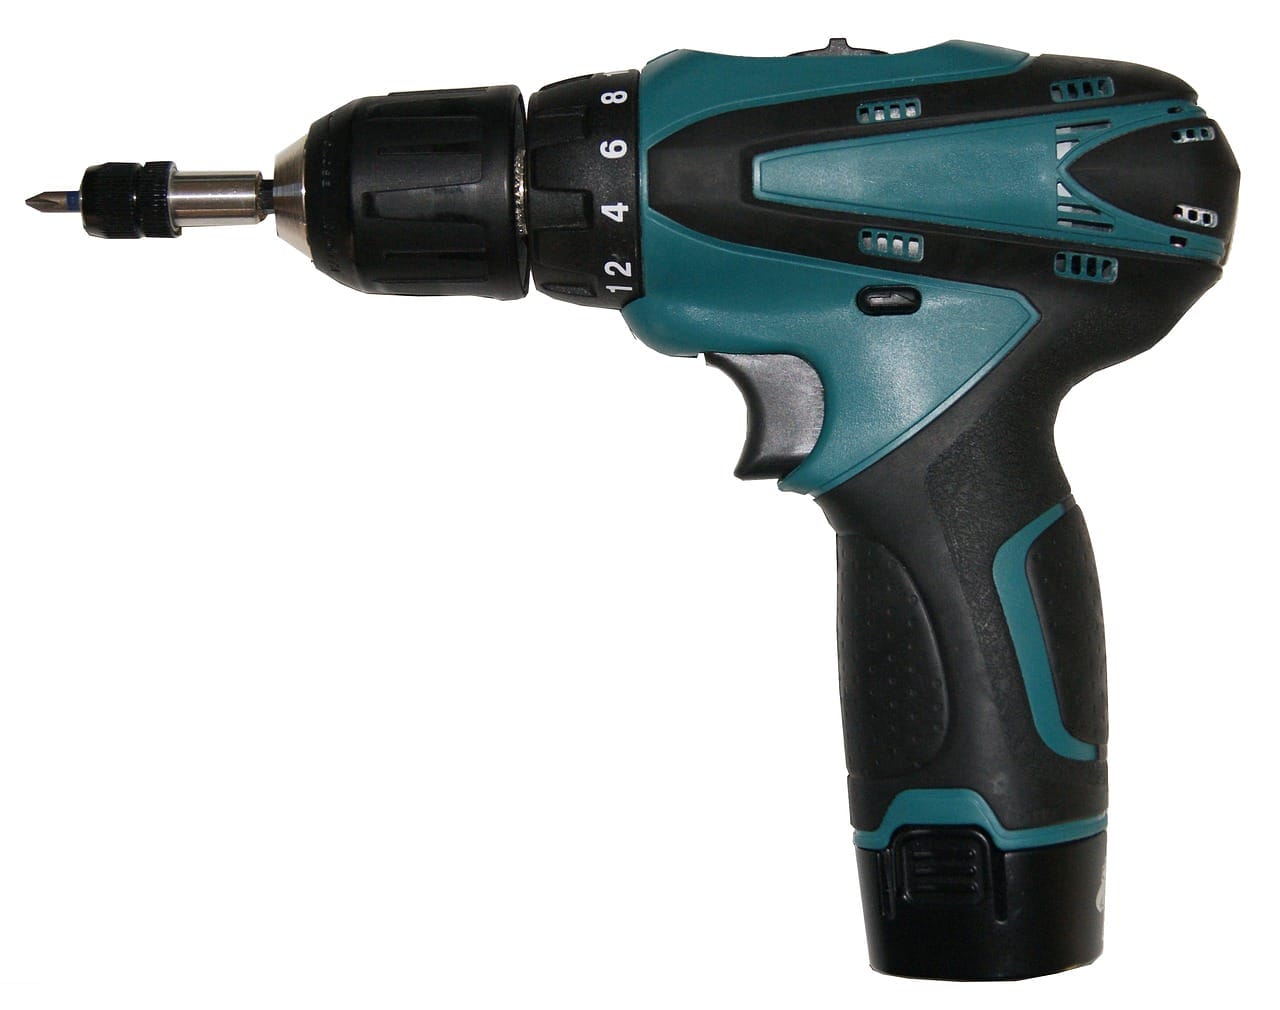 Image shows a cordless screwdriver.